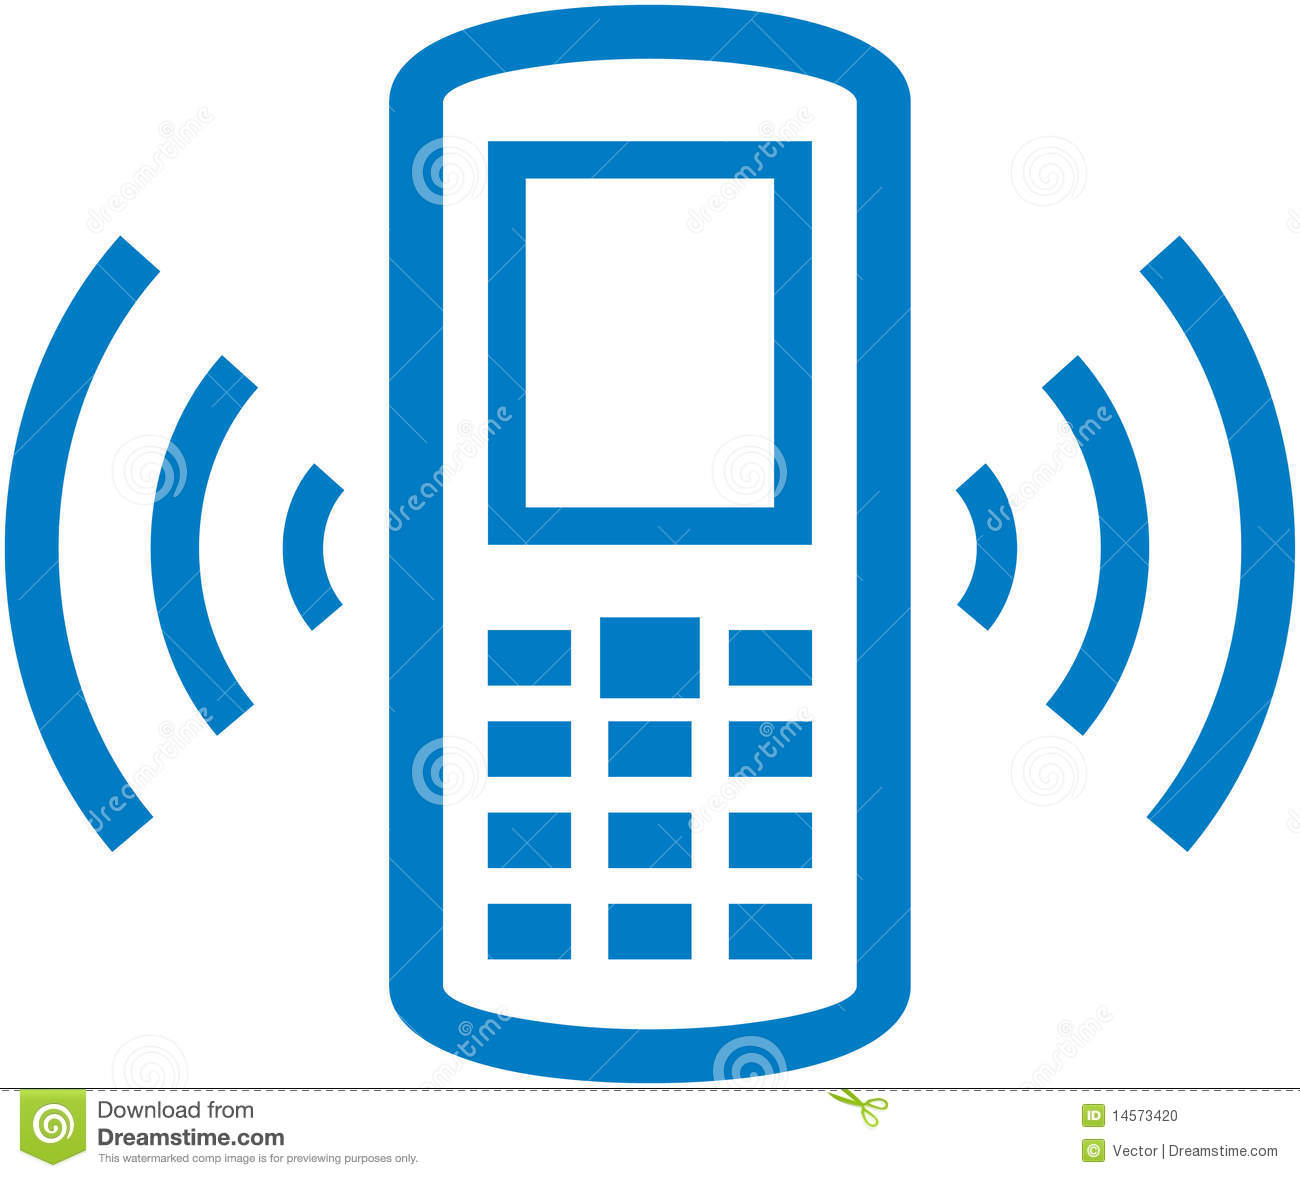 Vector Ringing Cell Phone Illustration Stock Photo   Image  14573420